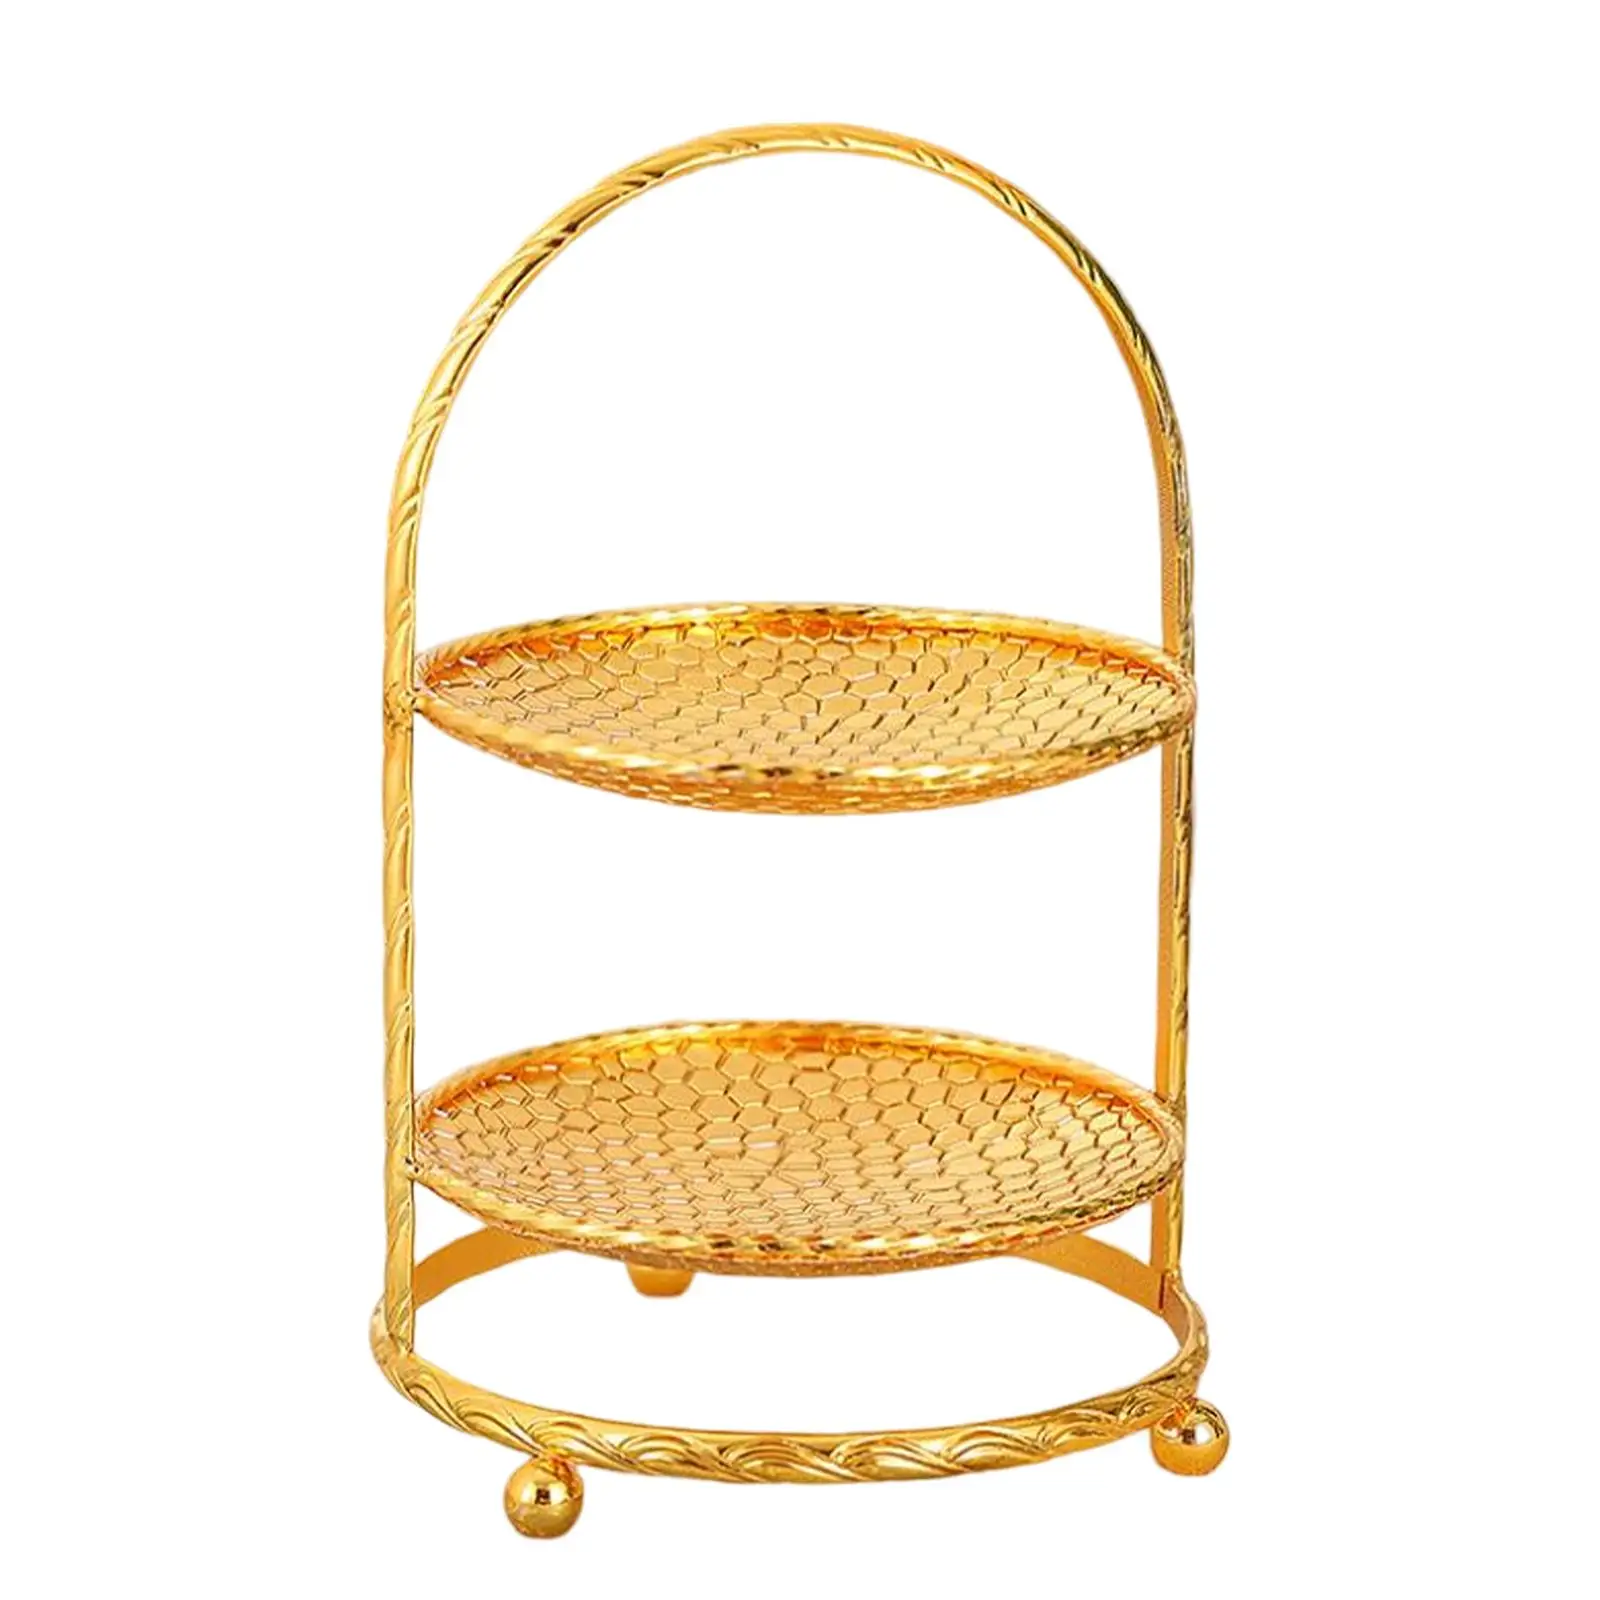 Golden 2 Tiered Cake Stand Tea Party Serving Platter Elegant Durable for Afternoon Tea ,Easy to Carry and Storage Widely Use